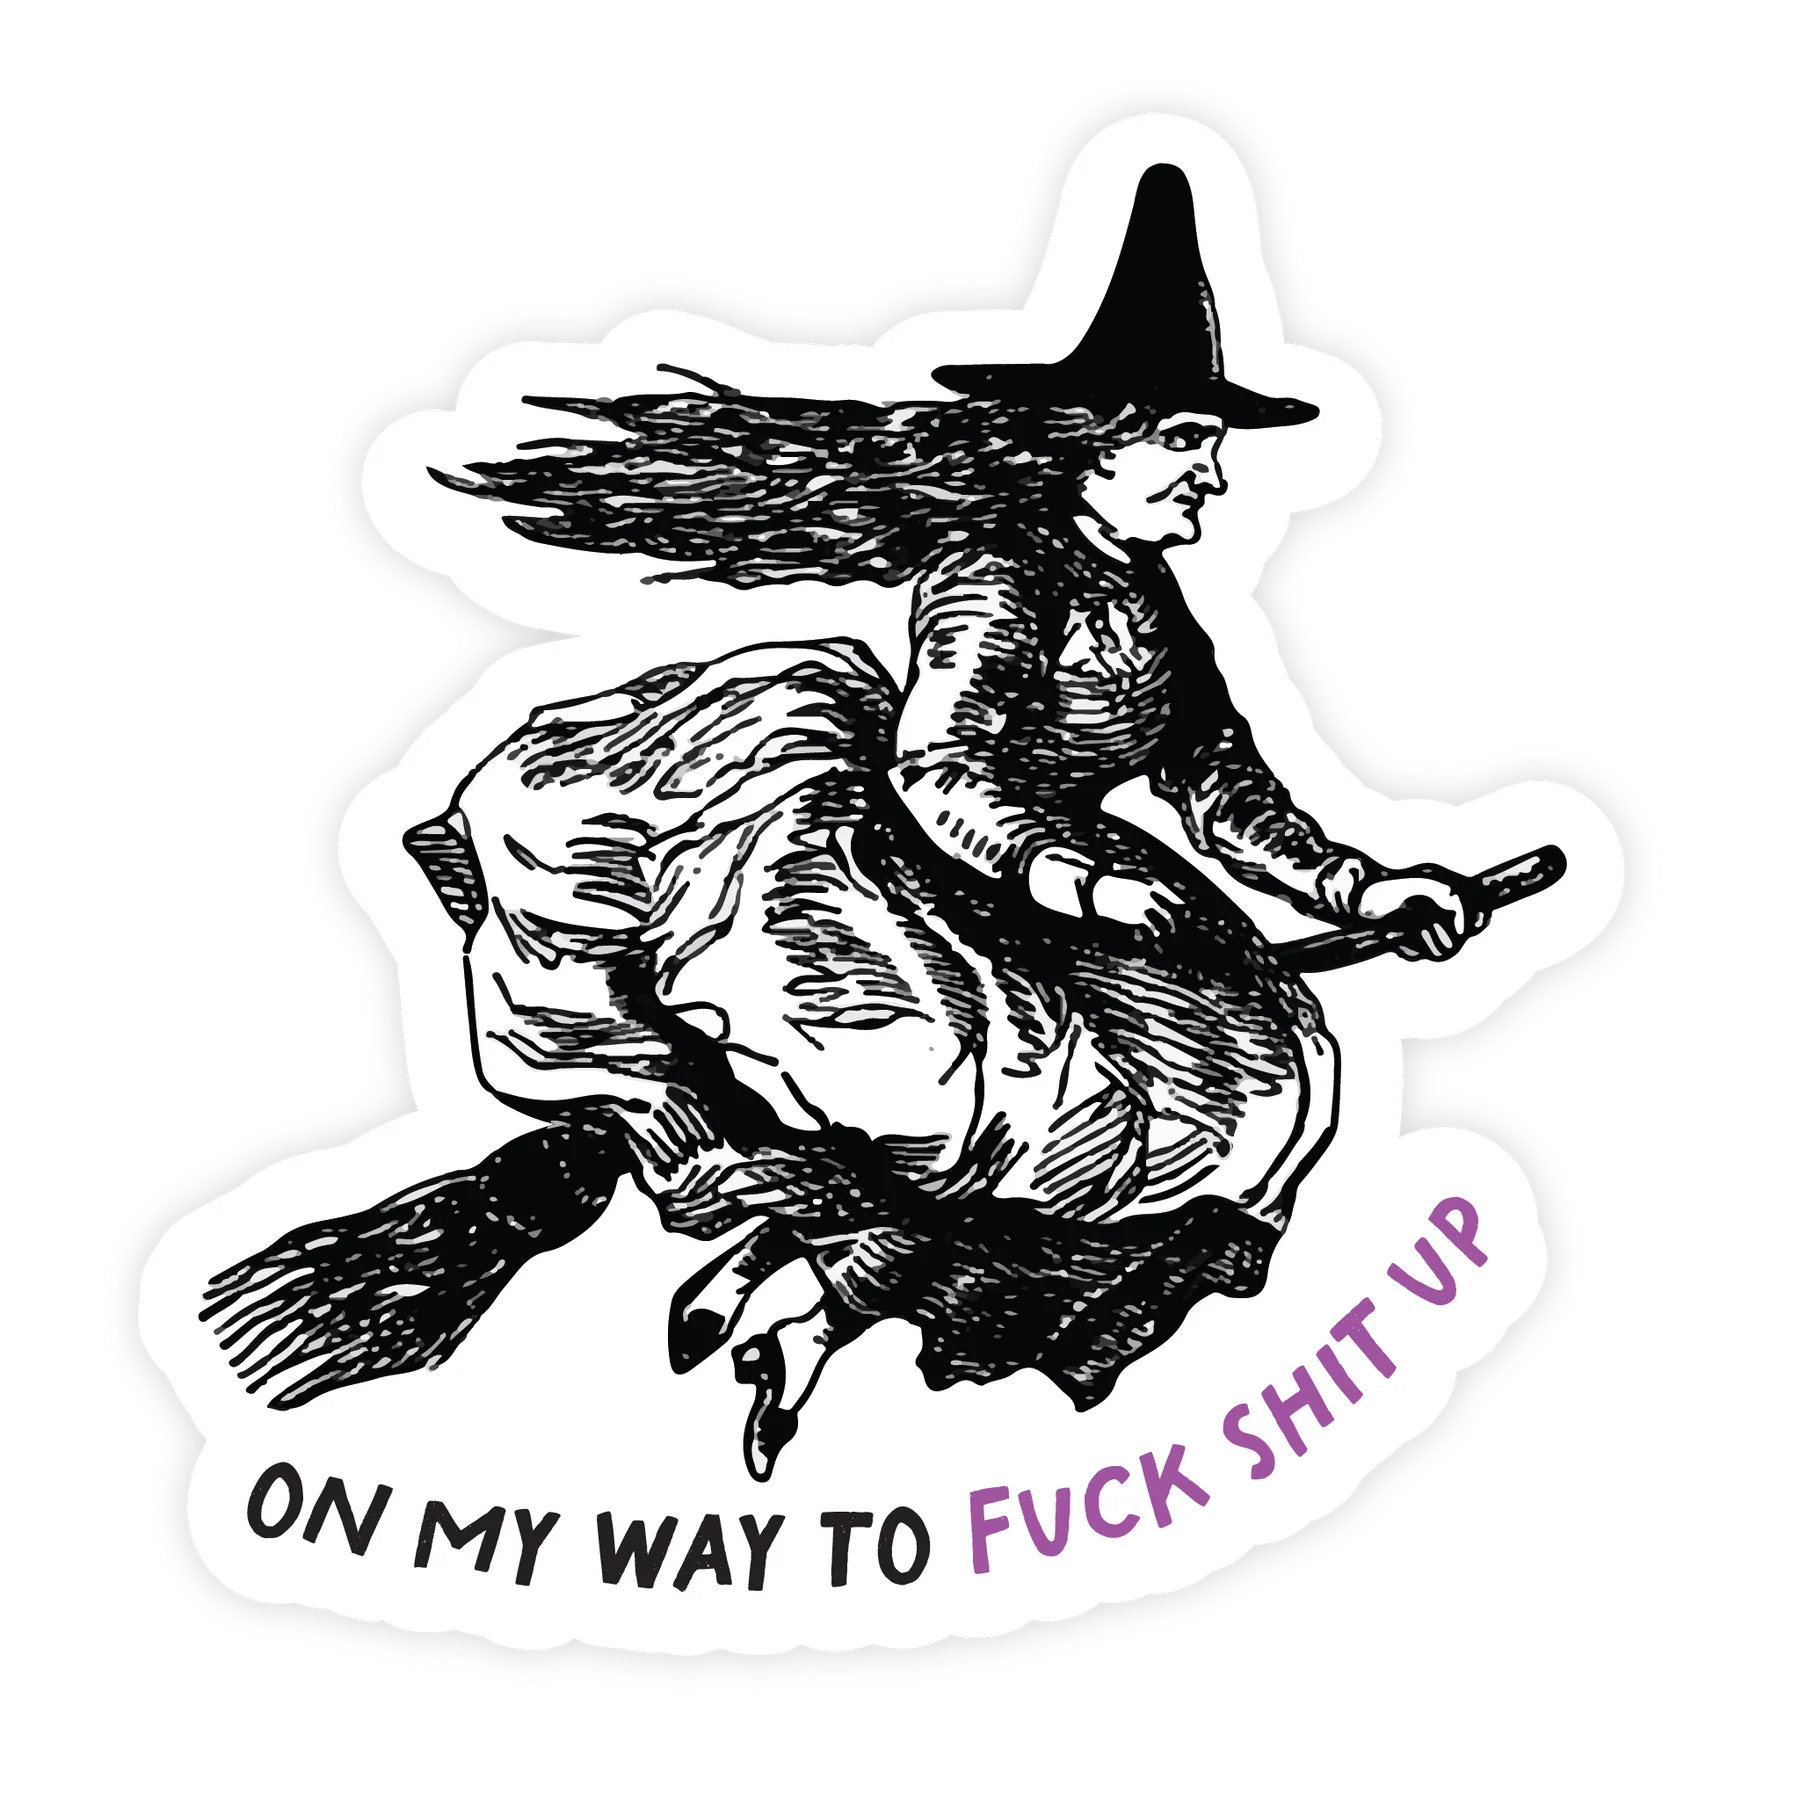 On My Way to Fuck Shit Up - Sticker | Pretty By Her